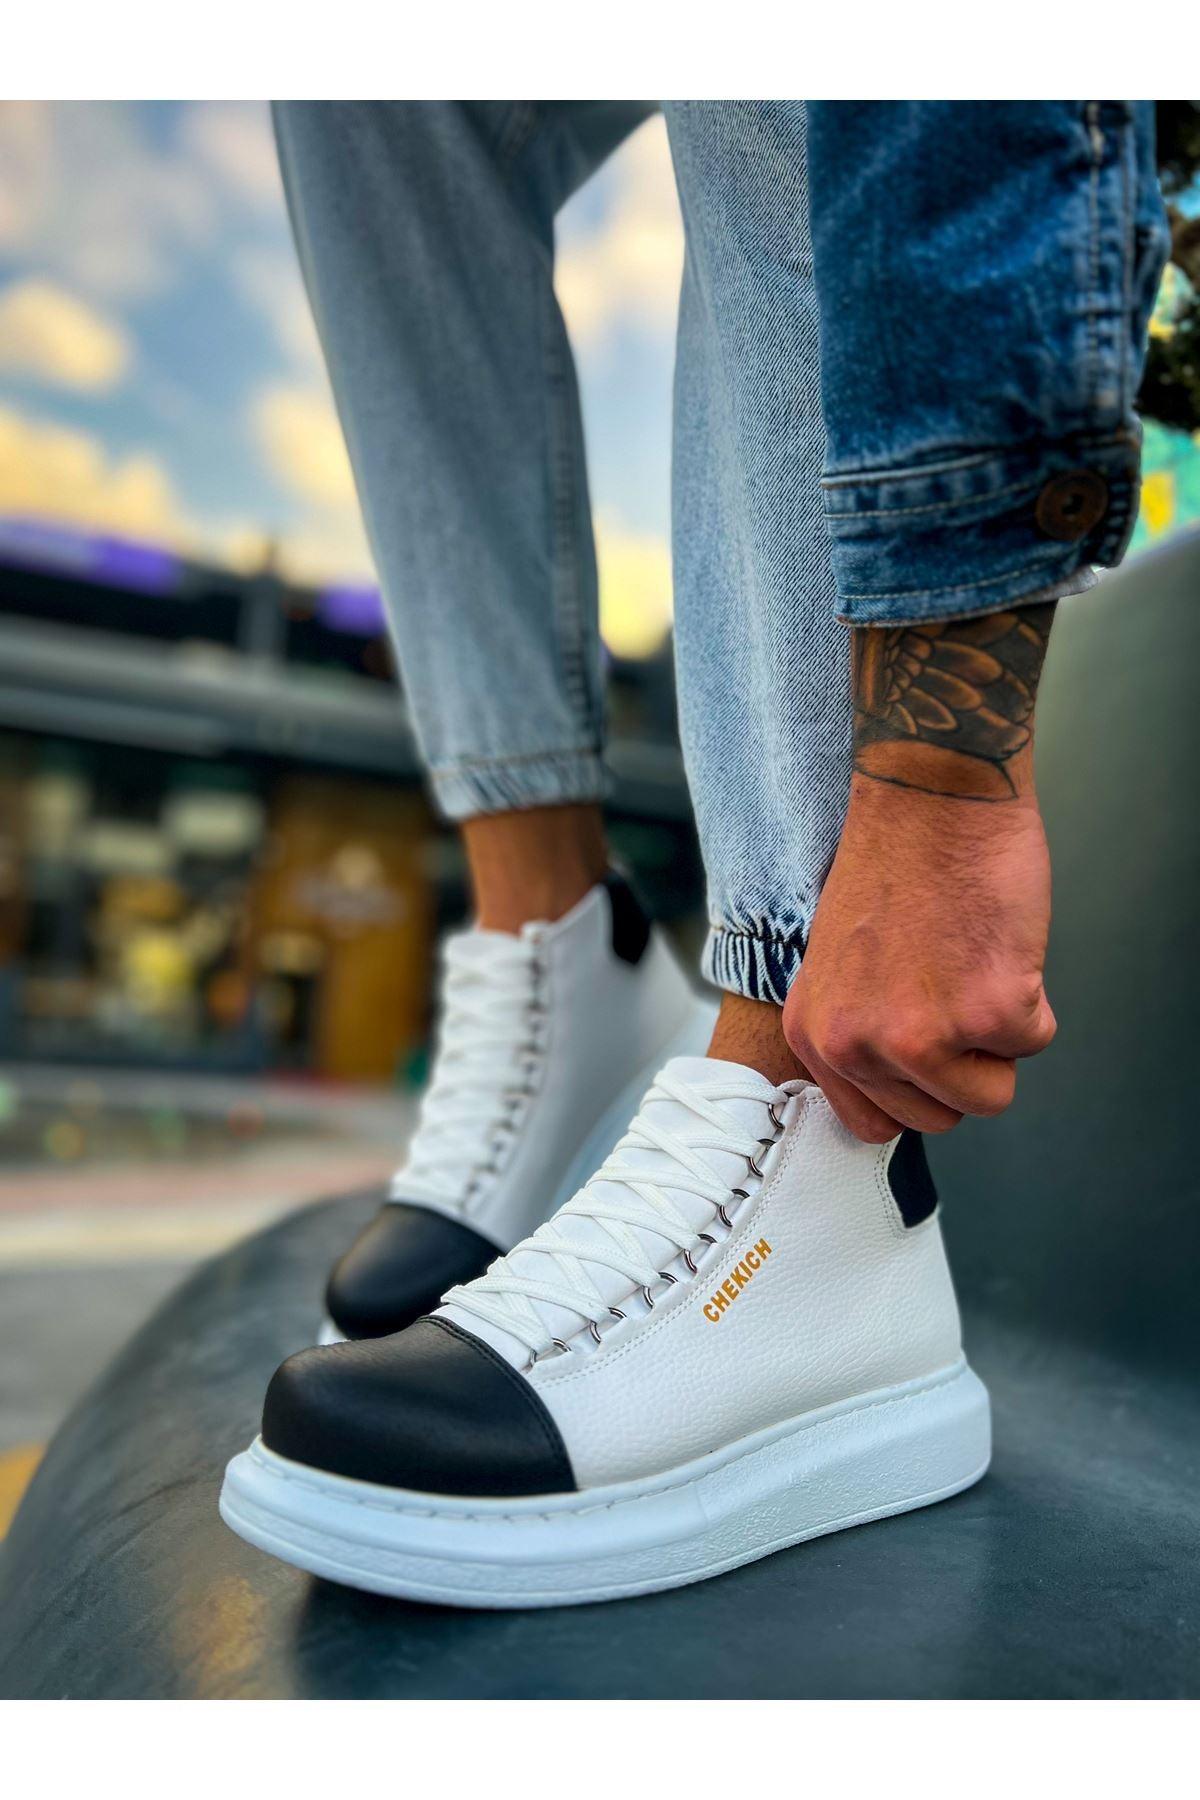 CH258 GBT Roma Colorful Men's shoes sneakers Boots WHITE/BLACK - STREET MODE ™